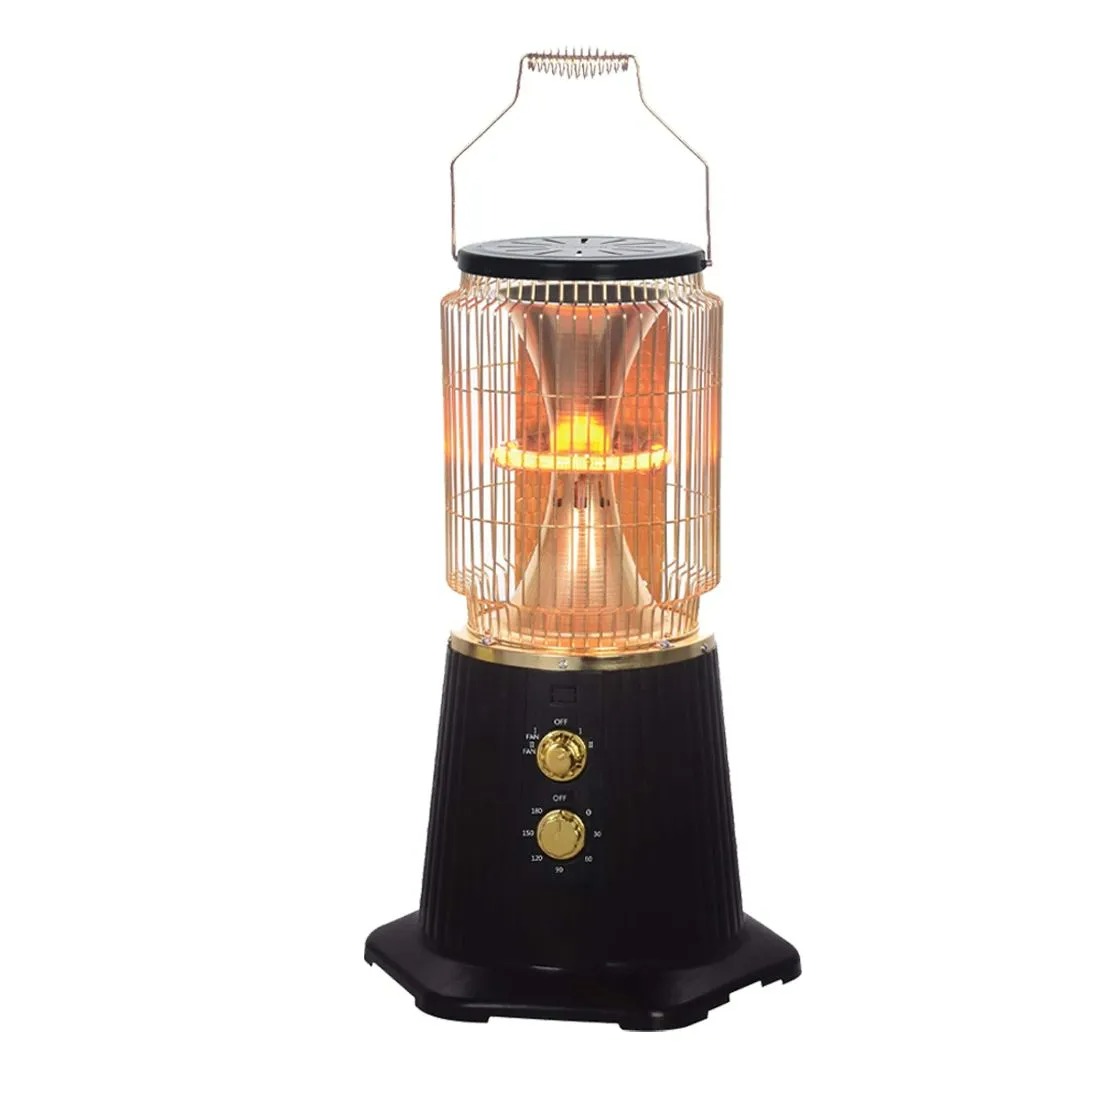 KION Electric Heater 1800W, Heating range 360, with fan, safety switch for operation - KH/2670B